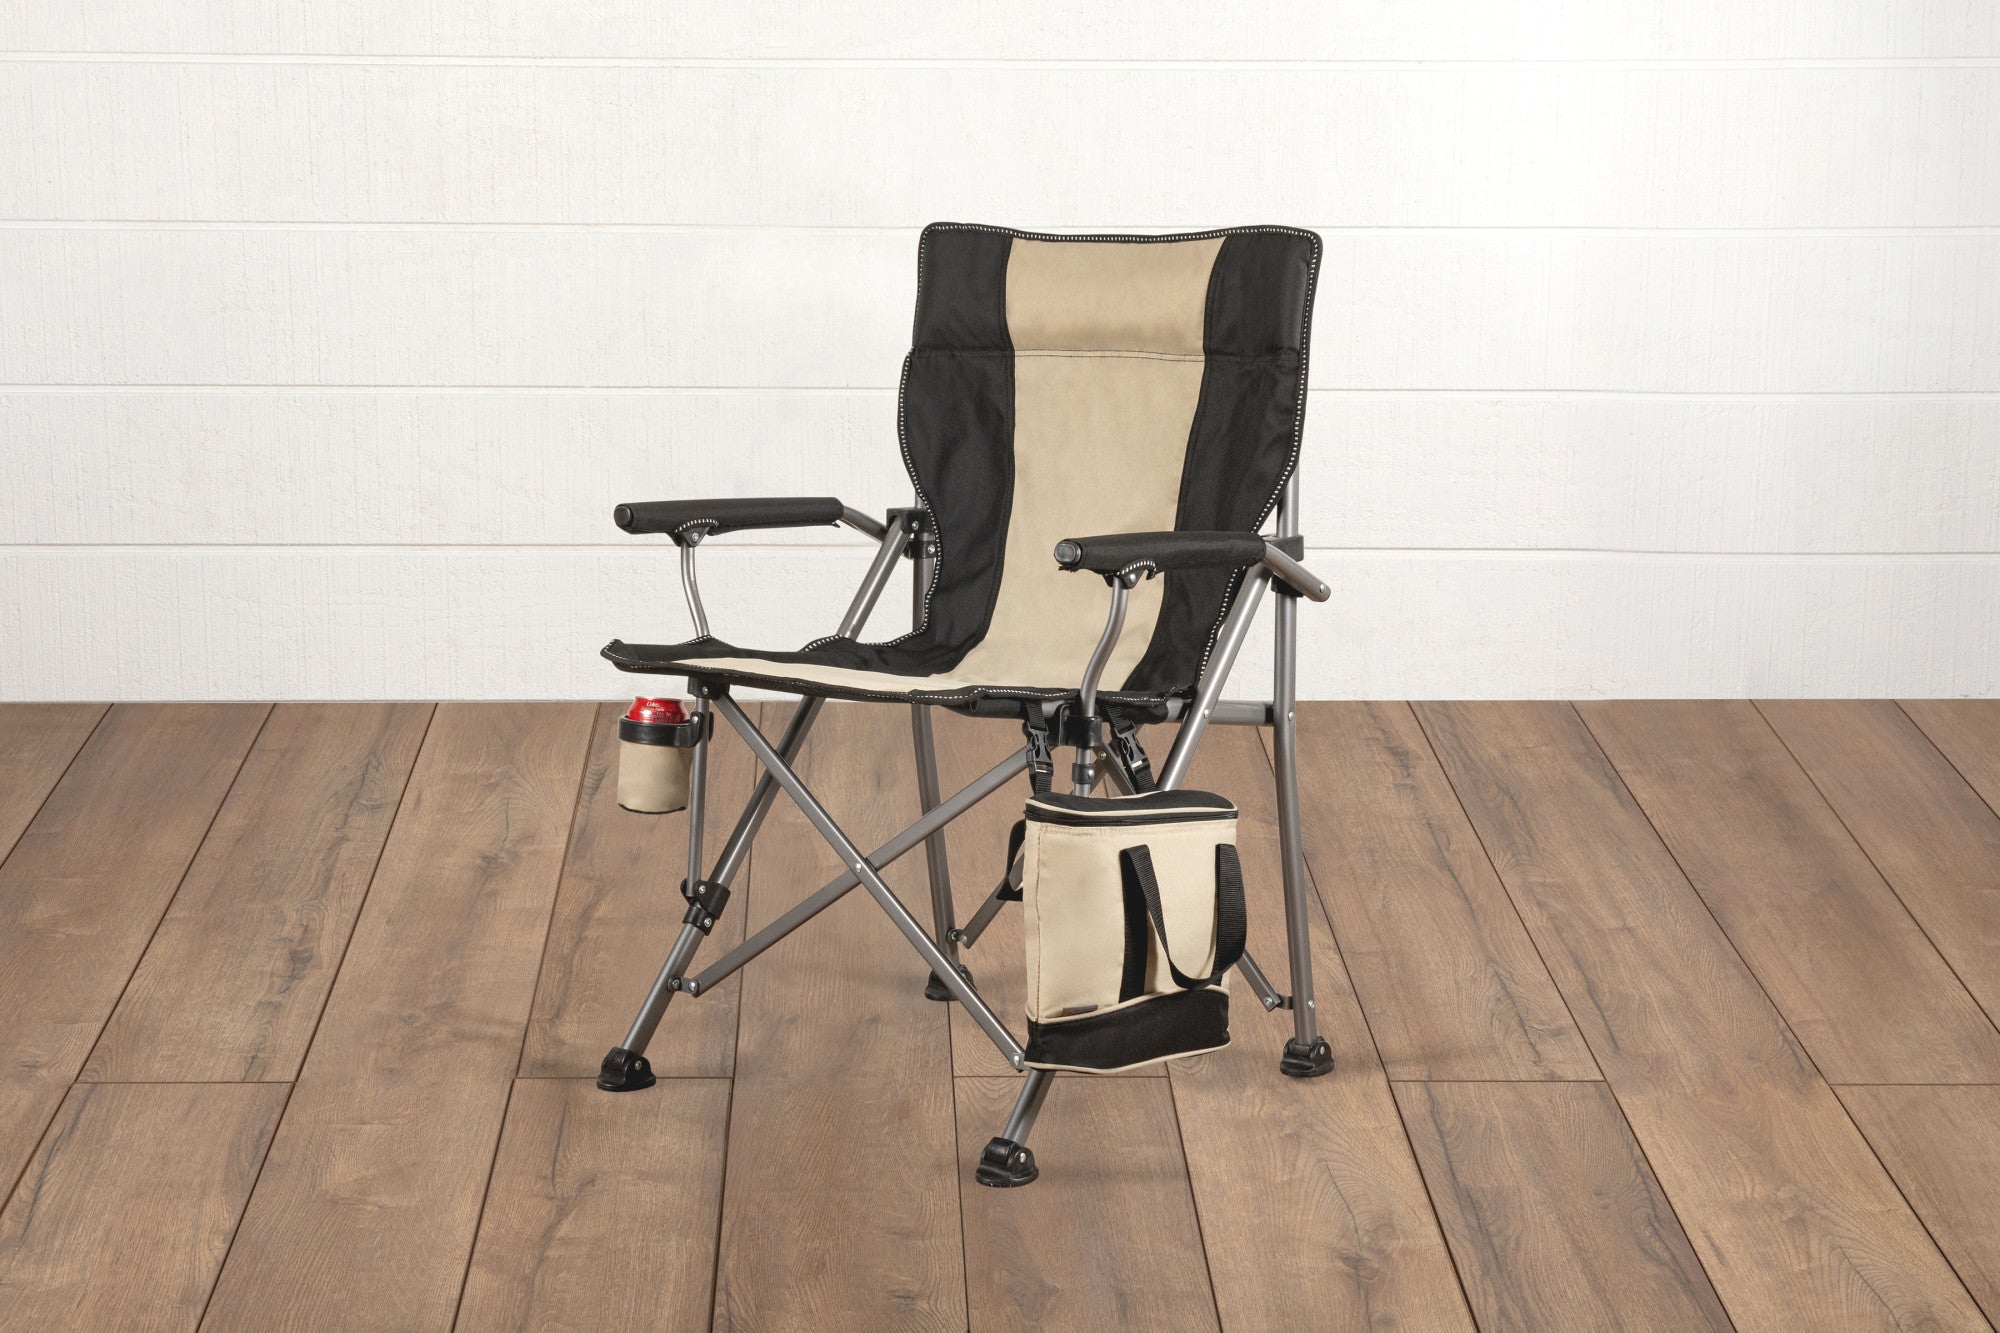 Philadelphia Eagles - Outlander XL Camping Chair with Cooler